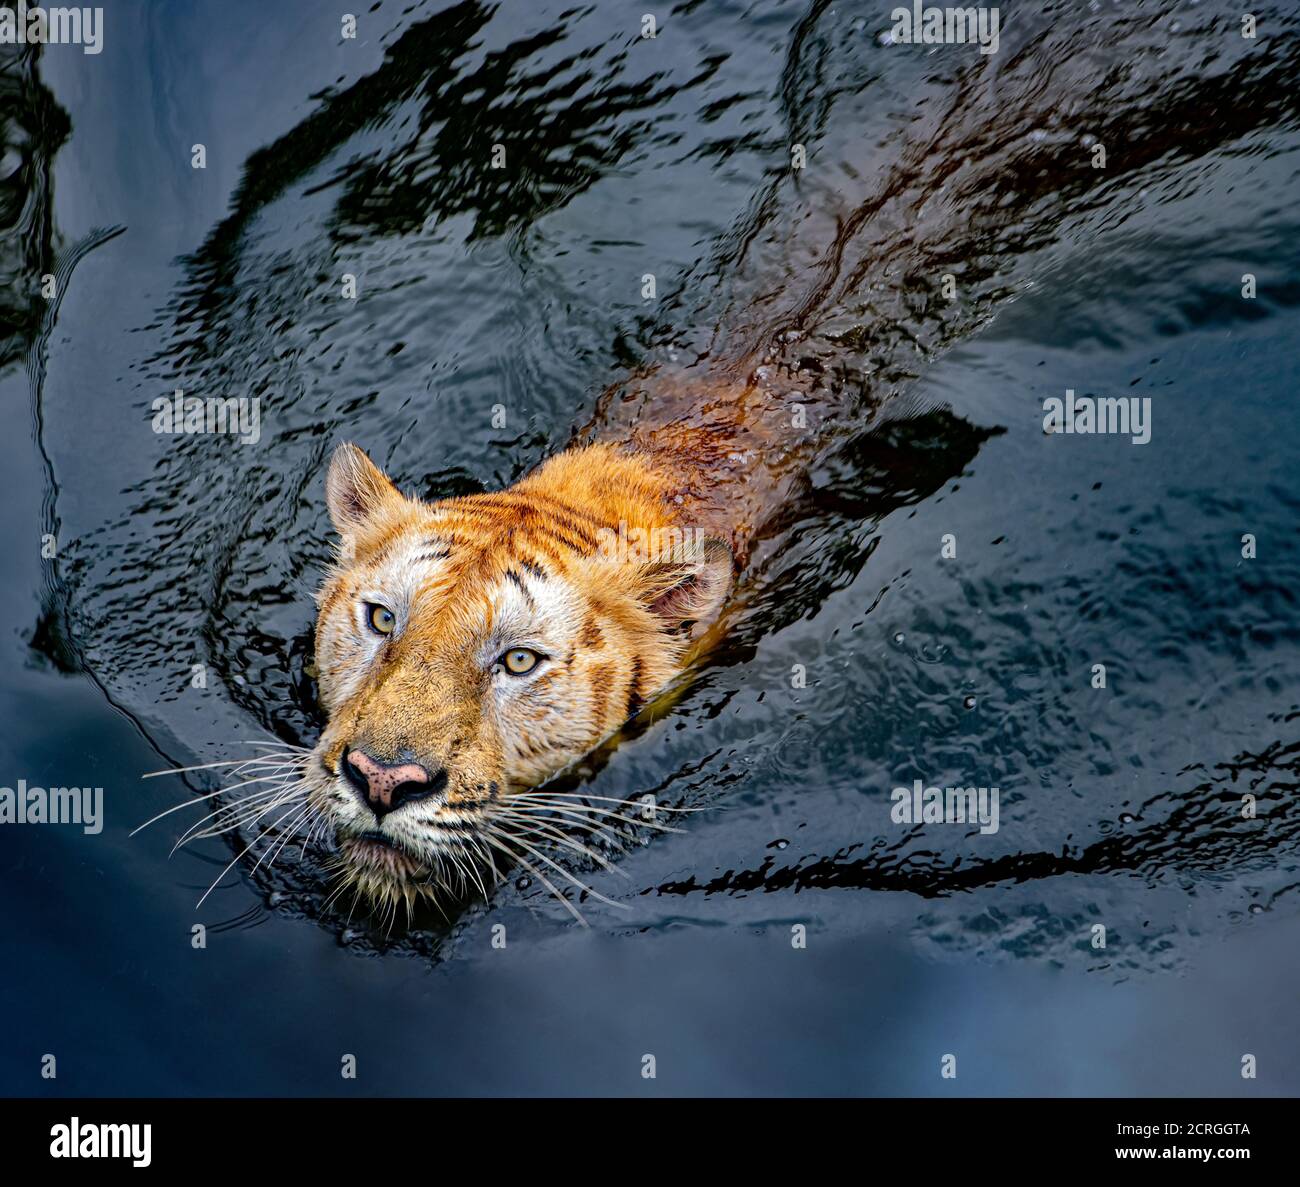 The tiger swims on the water. The floating tiger breaks the waves on the dark water surface. Stock Photo